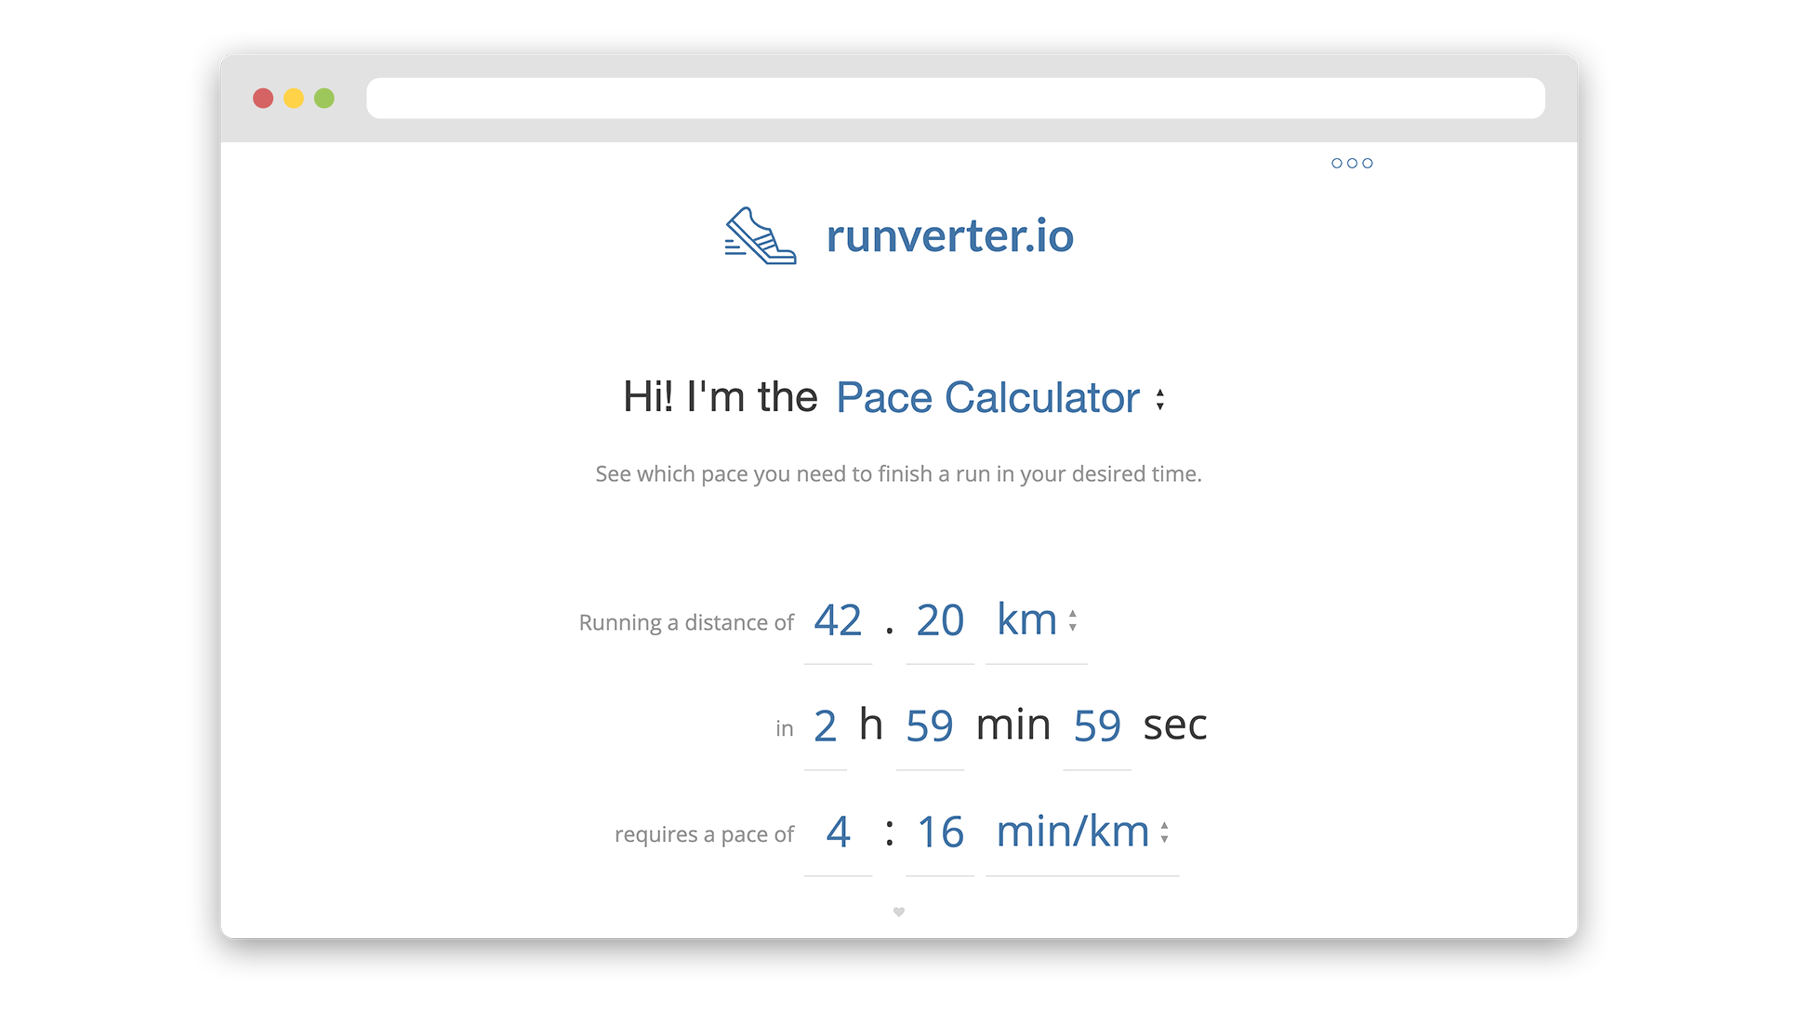 screenshot of the runverter.io website that shows a pace calculator